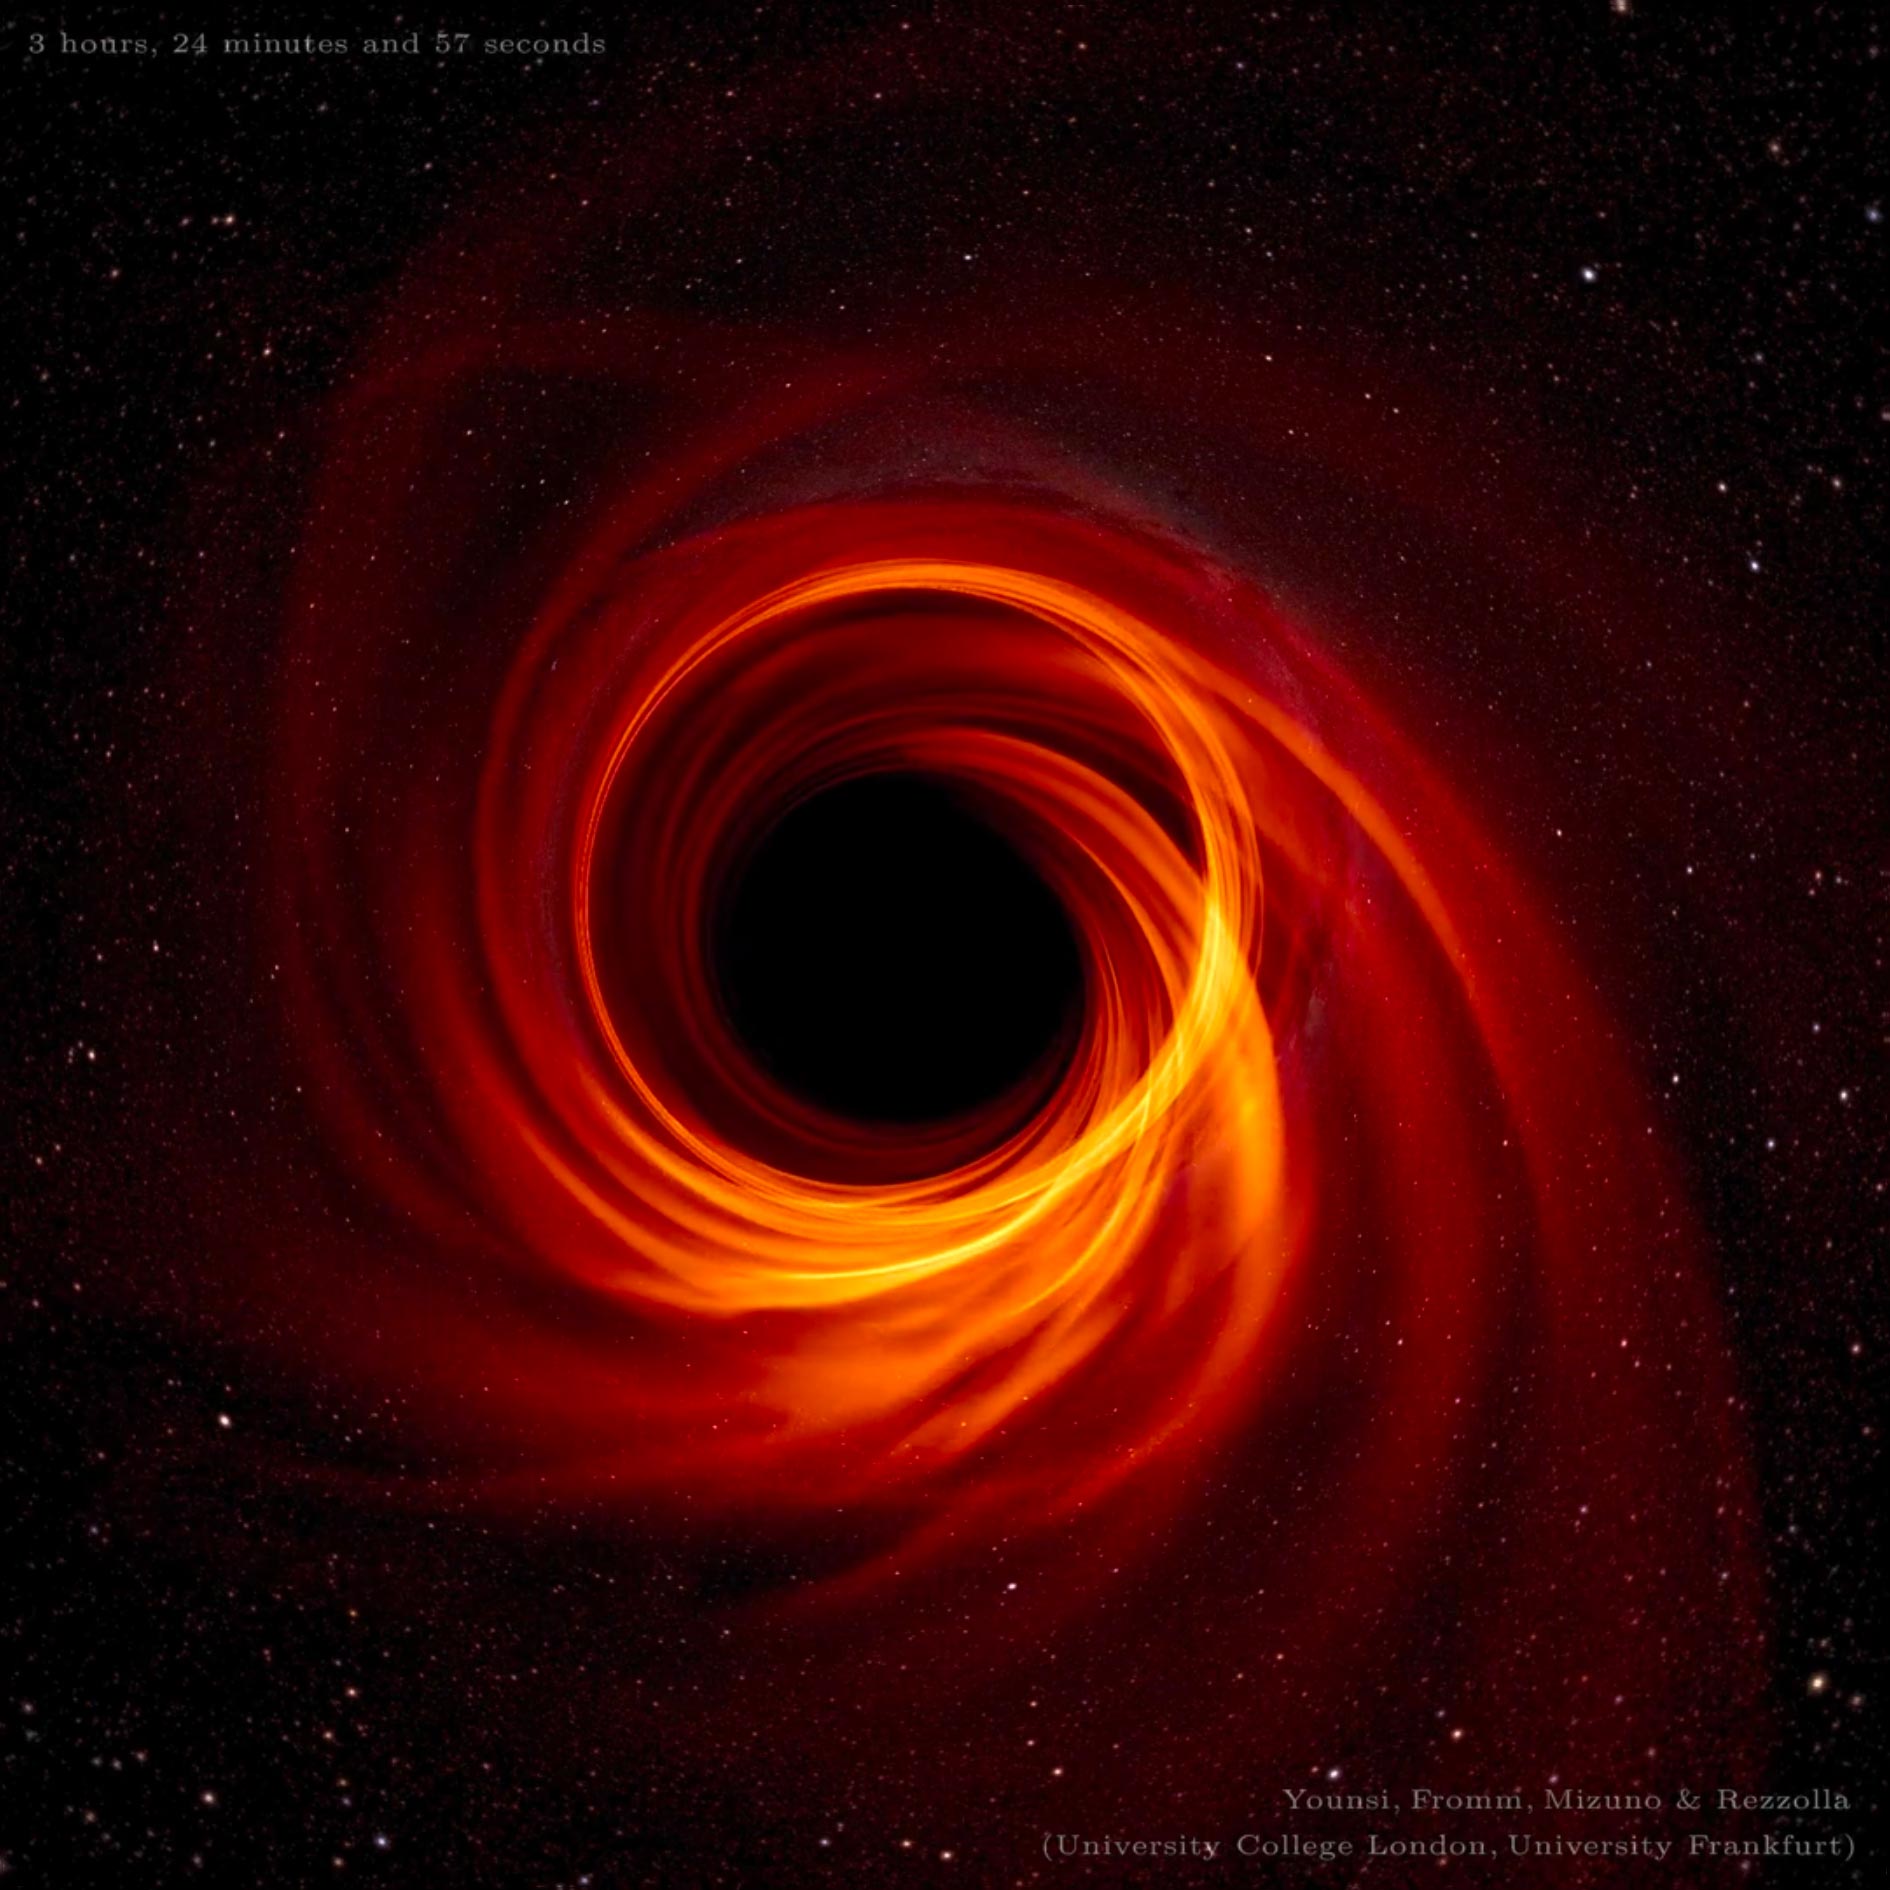 First Direct Visual Evidence That the Object in the Center of the Milky Way Is Indeed a Black Hole